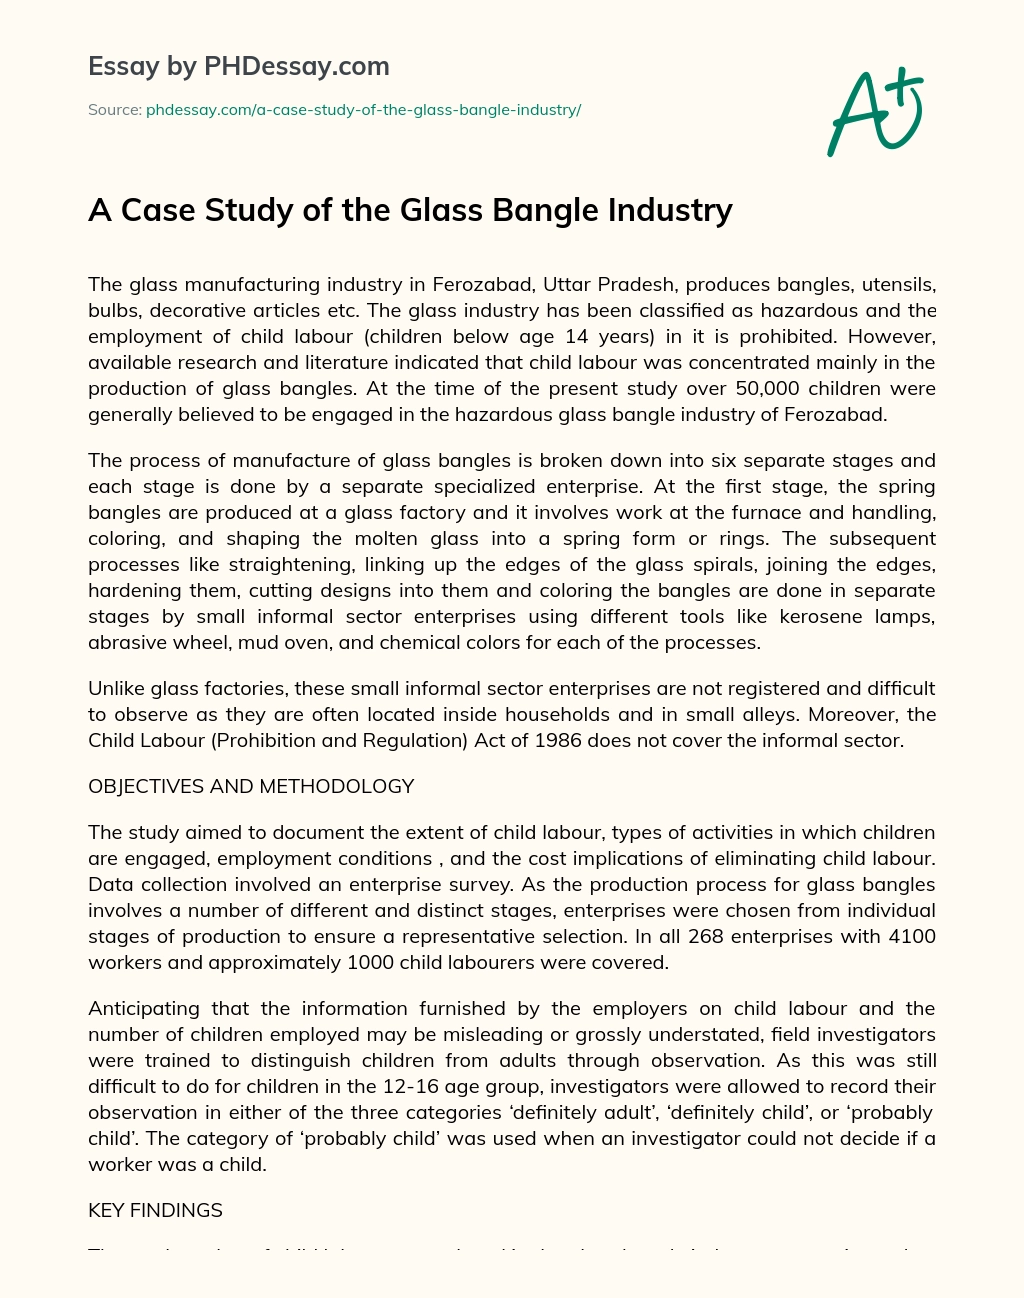 A Case Study of the Glass Bangle Industry essay